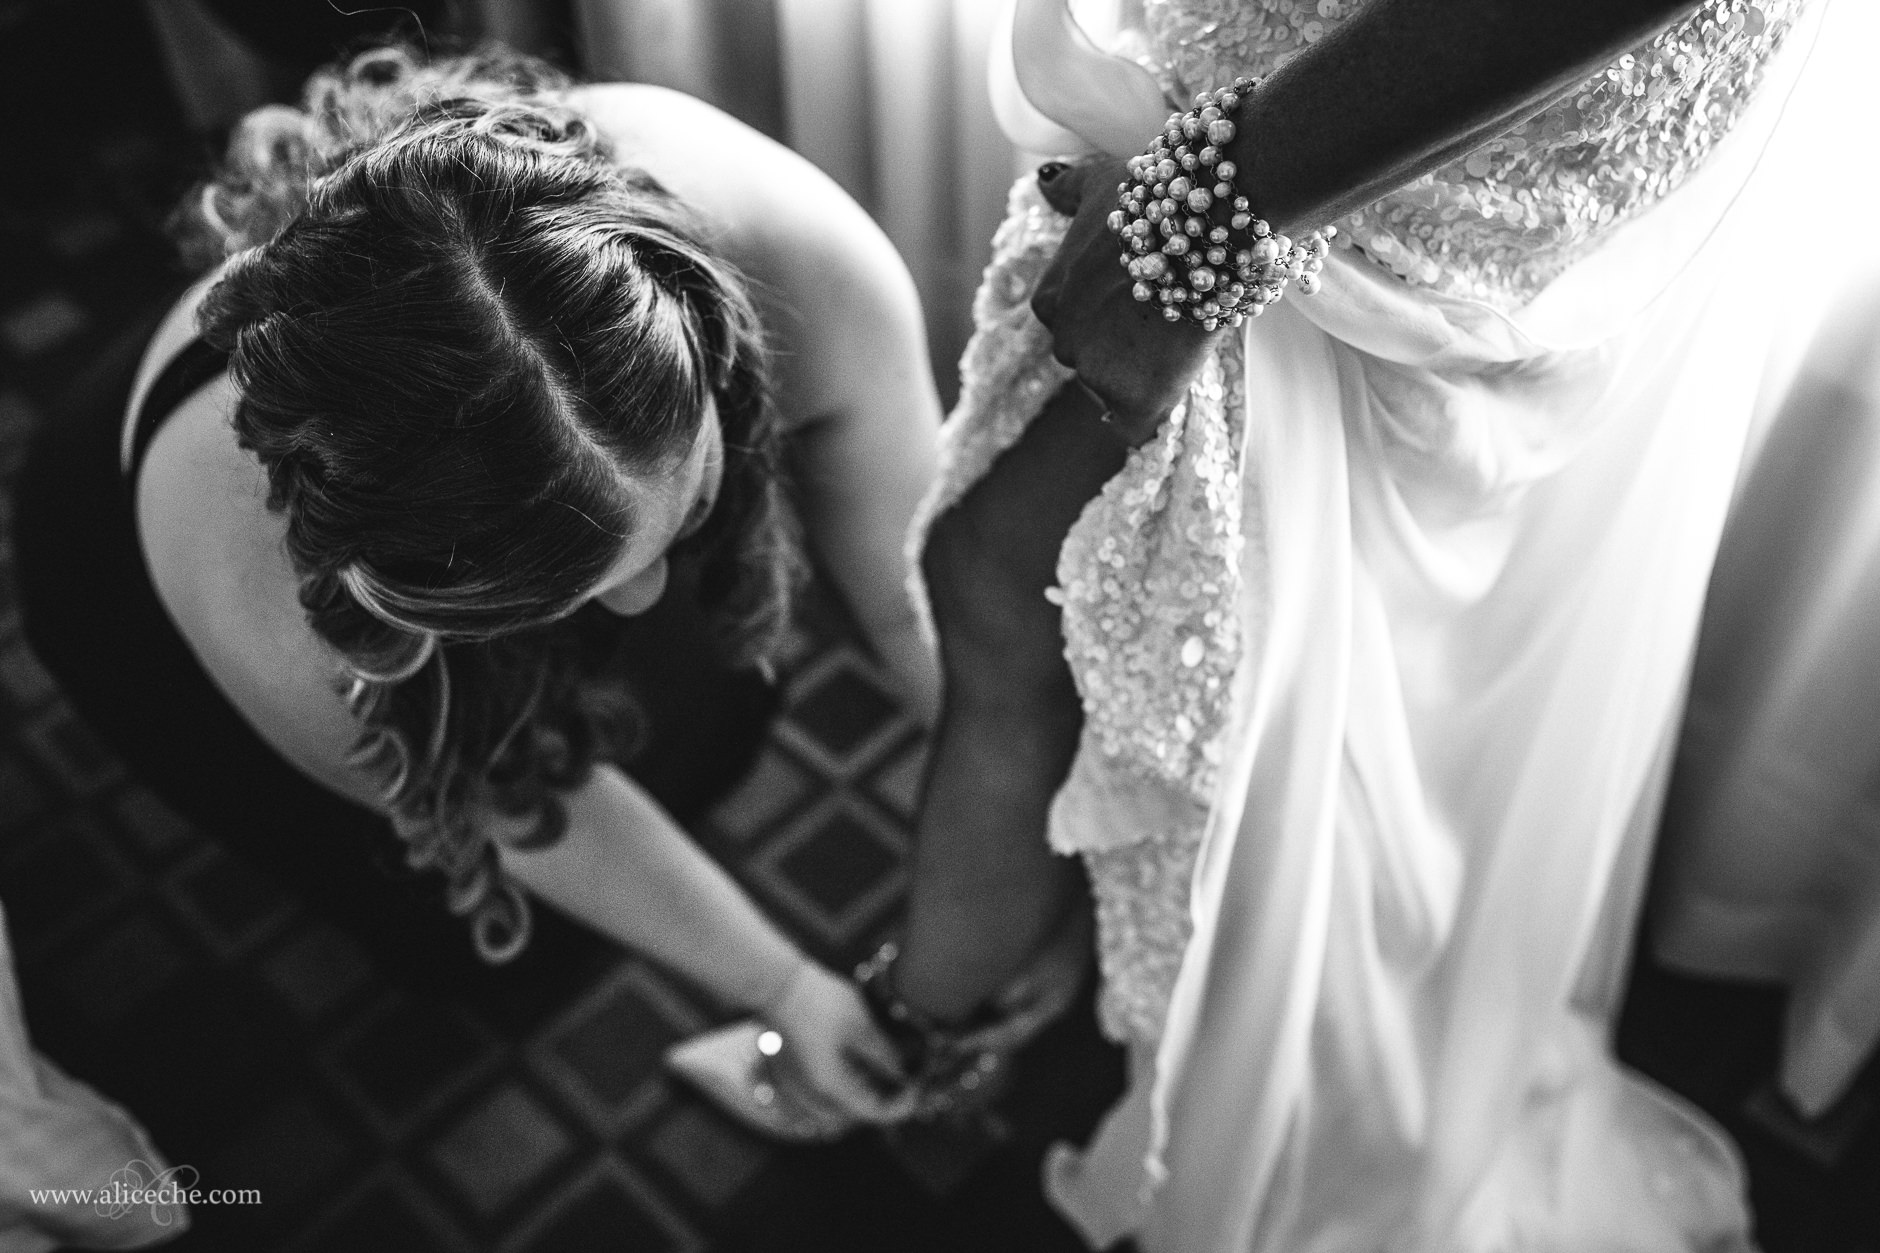 Bridesmaid helping bride put on shoes for New Year's Eve wedding in Berkeley